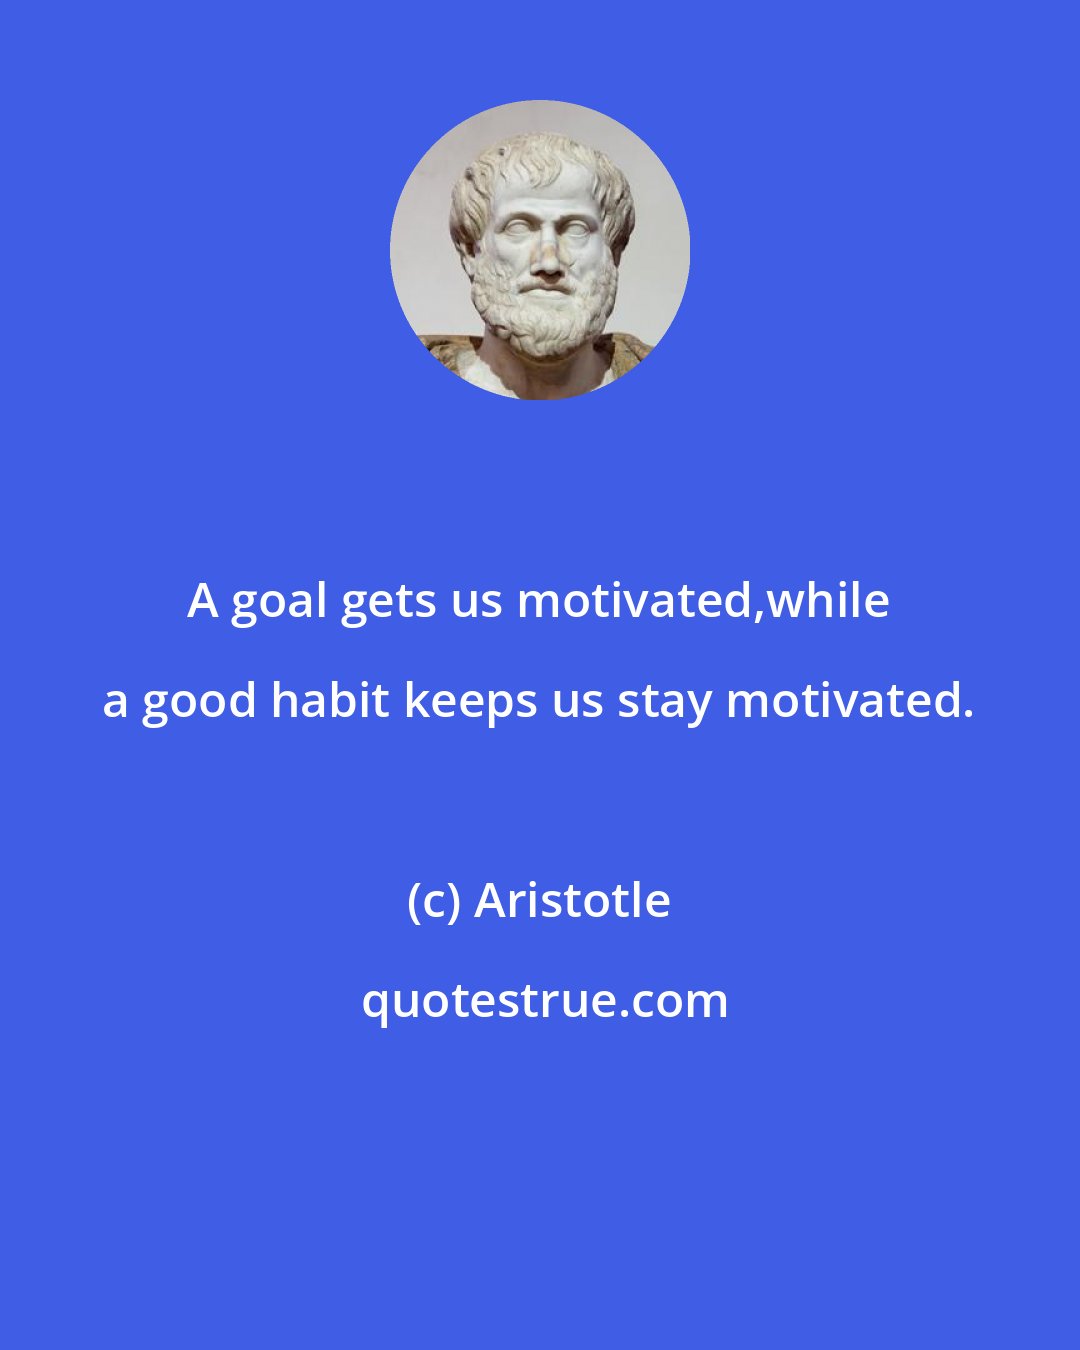 Aristotle: A goal gets us motivated,while a good habit keeps us stay motivated.